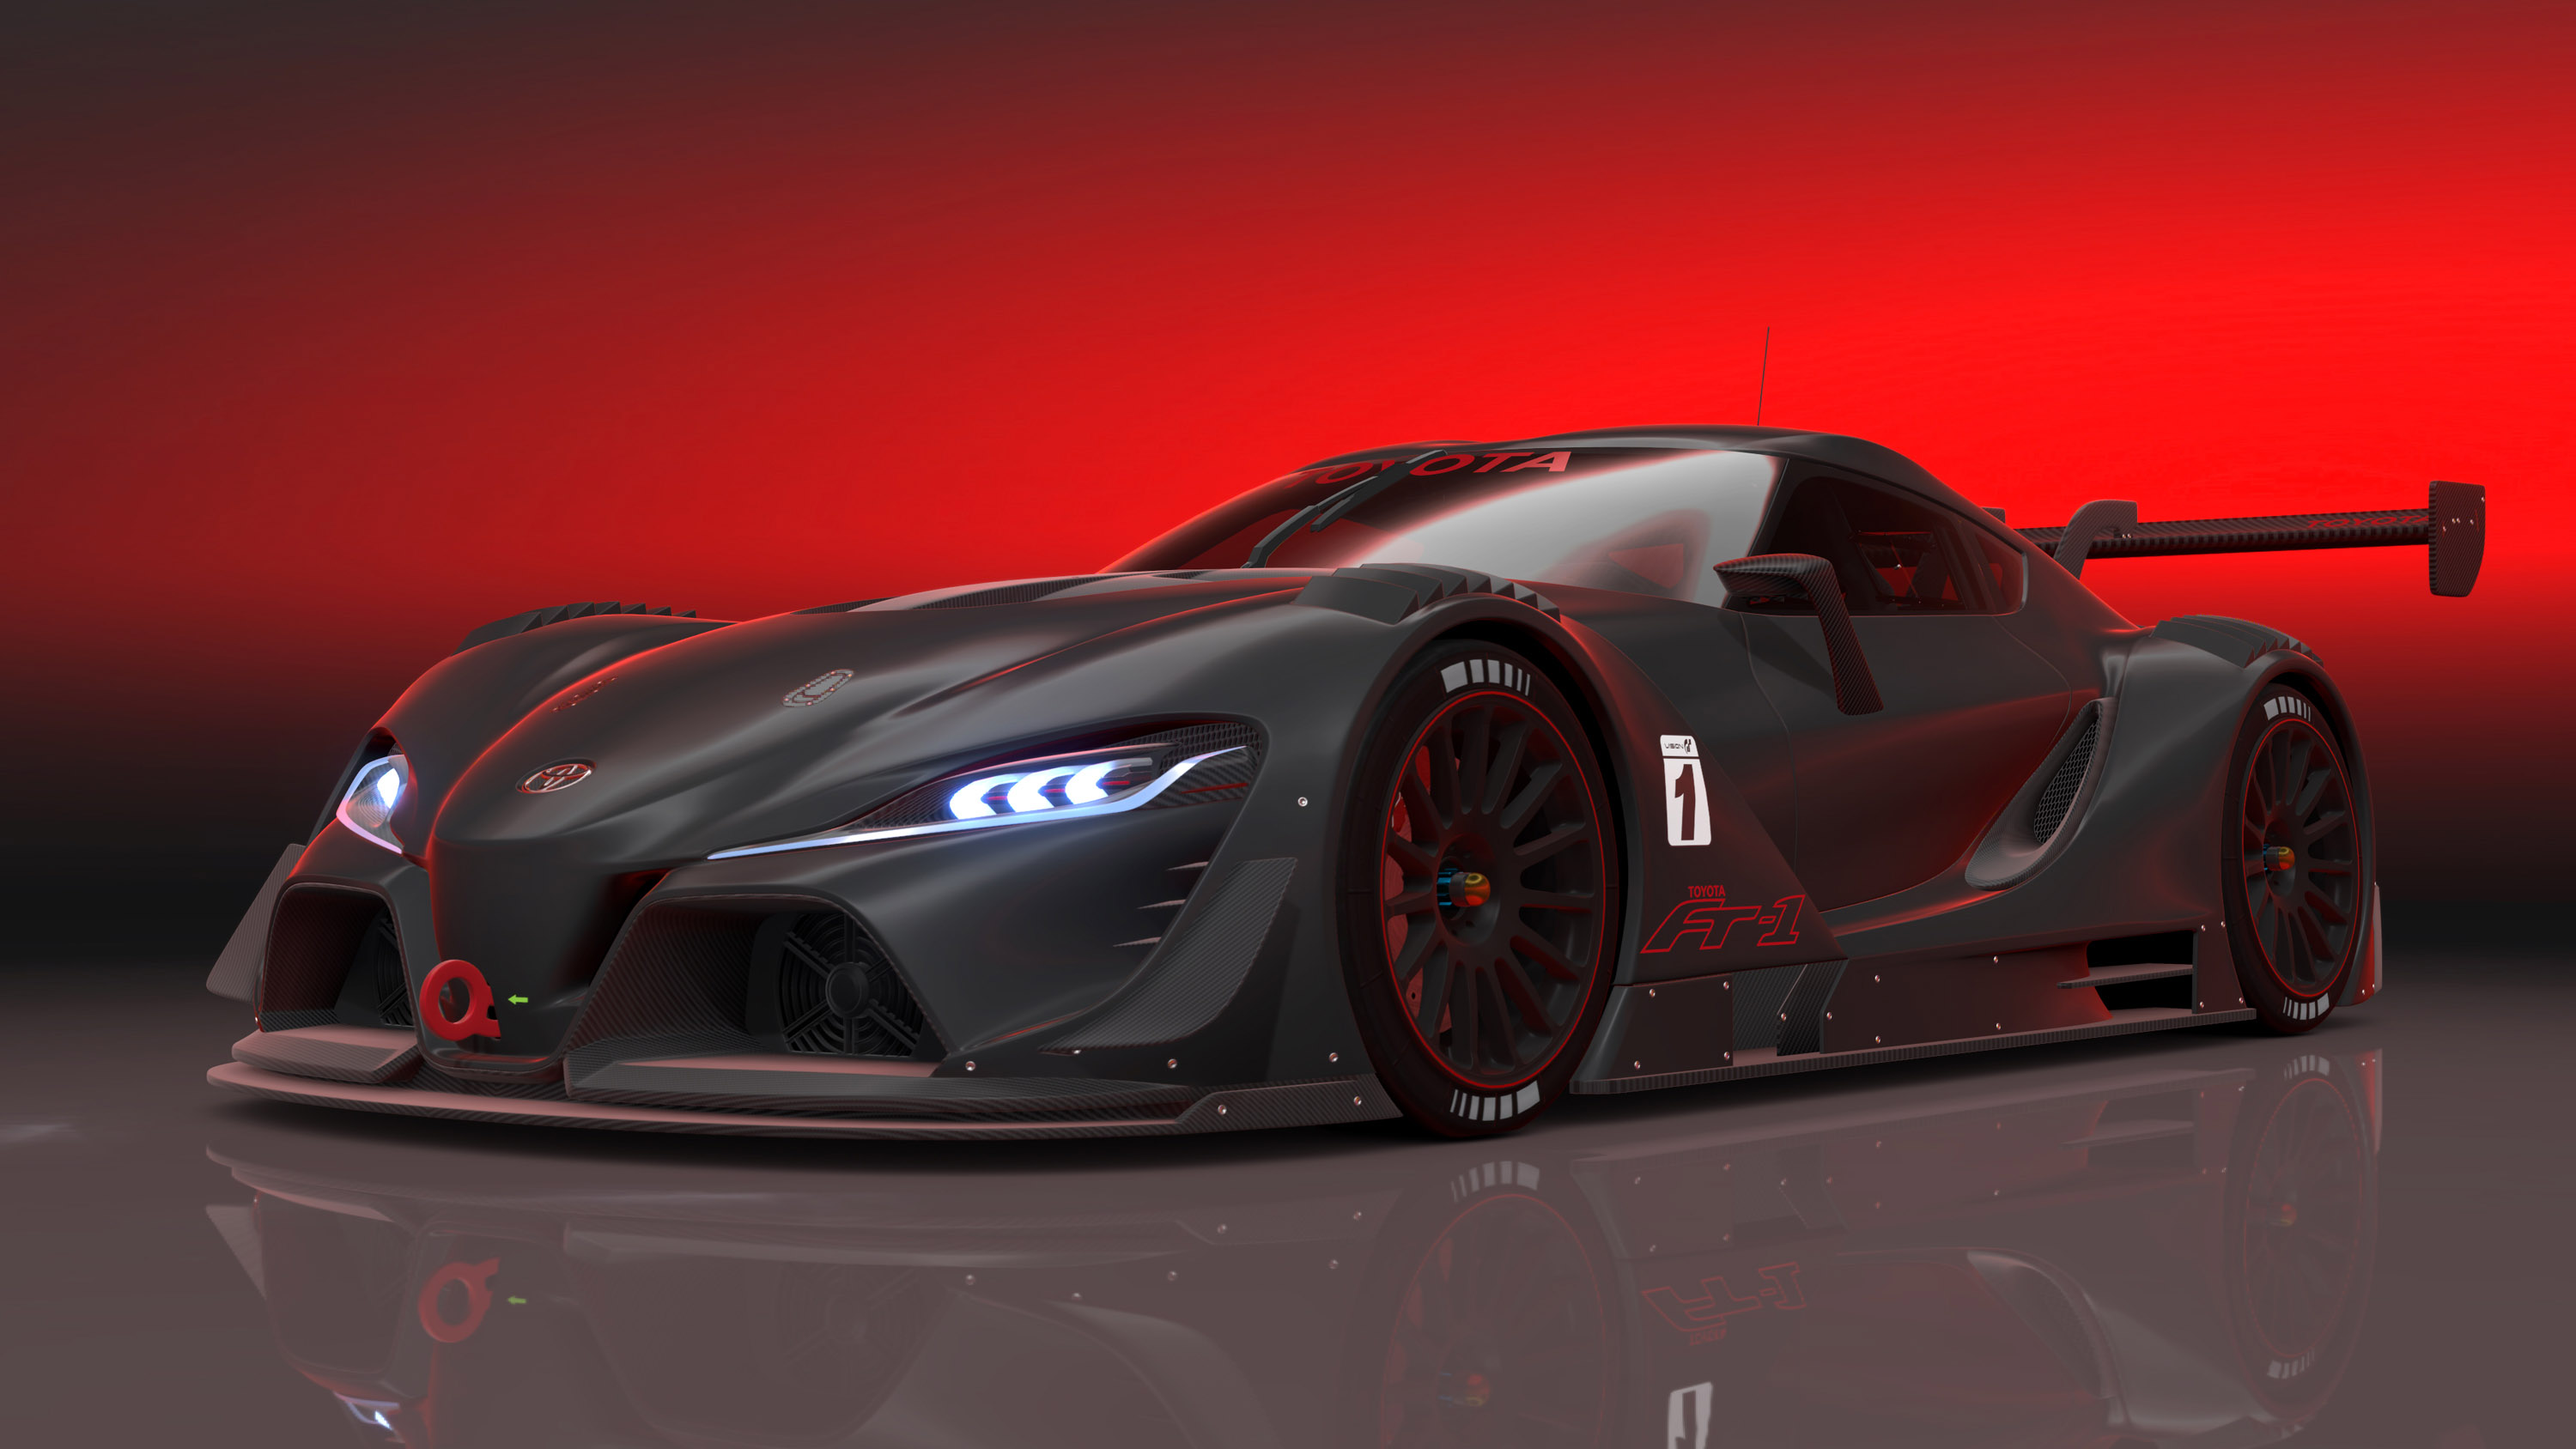 http://www.automobilesreview.com/gallery/toyota-ft-1-vision-gt/toyota-ft-1-vision-gt-02.jpg